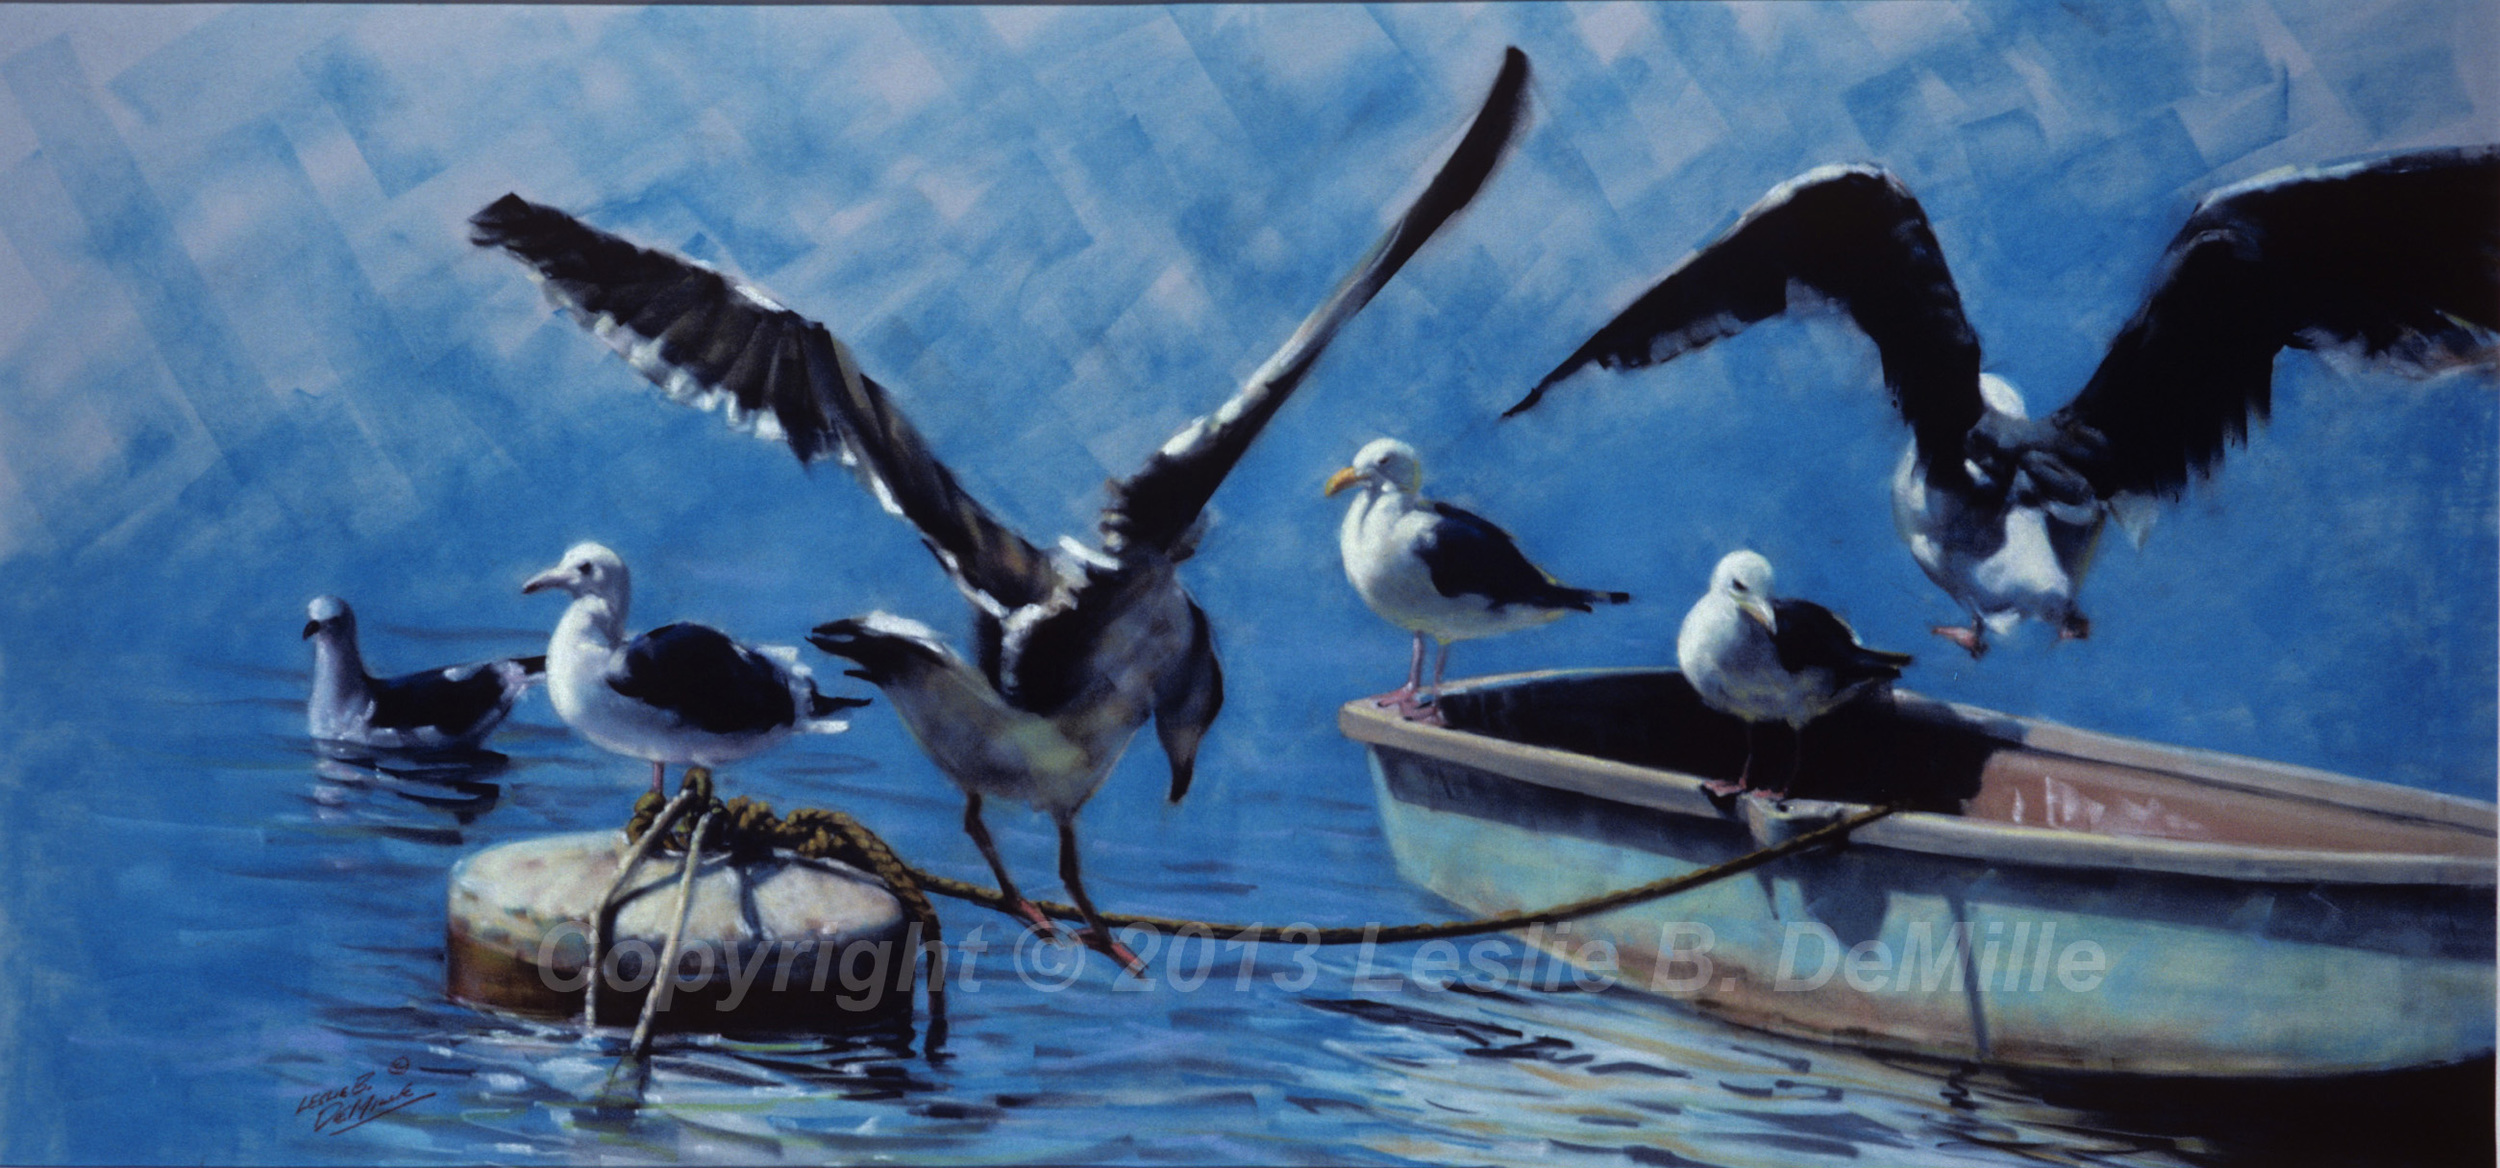 Seagulls on the Boat, Pastel 1985 (20x10)